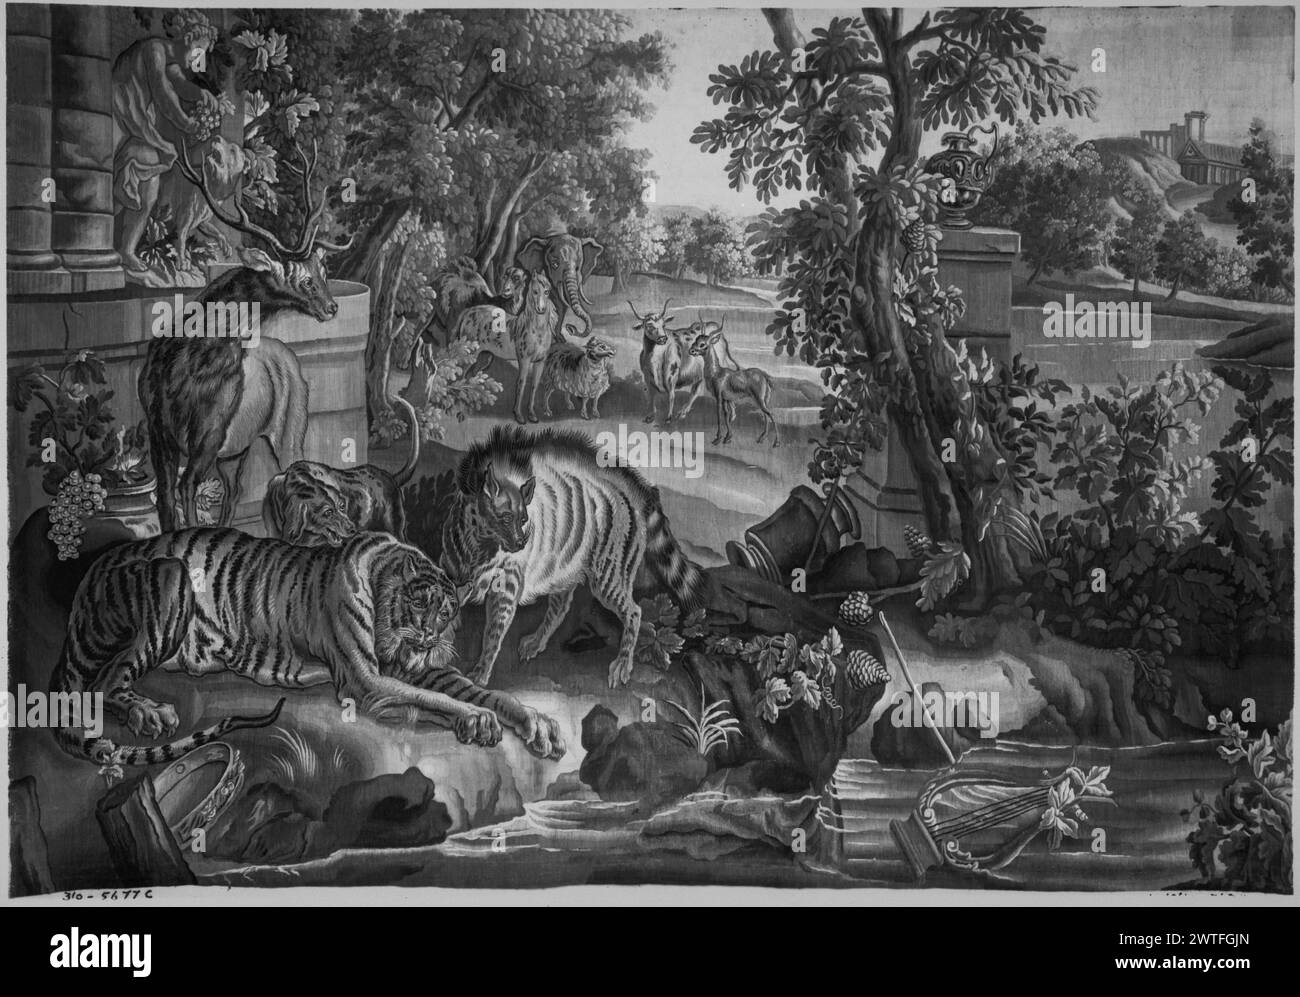 Death of Orpheus. Oudry, Jean-Baptiste (French, 1686-1755) (designed after) [painter] c. 1771 Tapestry Dimensions: H 7'4' x W 10'10' Tapestry Materials/Techniques: unknown Culture: French Weaving Center: Aubusson Ownership History: French & Co. purchased from Simon Roseman, received 4/12/1914; sold to H. B. Harris 6/29/1943. After Orpheus is killed by the Maenads, his lyre continues to float down the Hebrus river, still singing & charming the animals Borders missing (Soustelle) This scene is part of the Ovid's Metamorphoses series designed by Jean-Baptiste Oudry for the Beauvais manufactory in Stock Photo